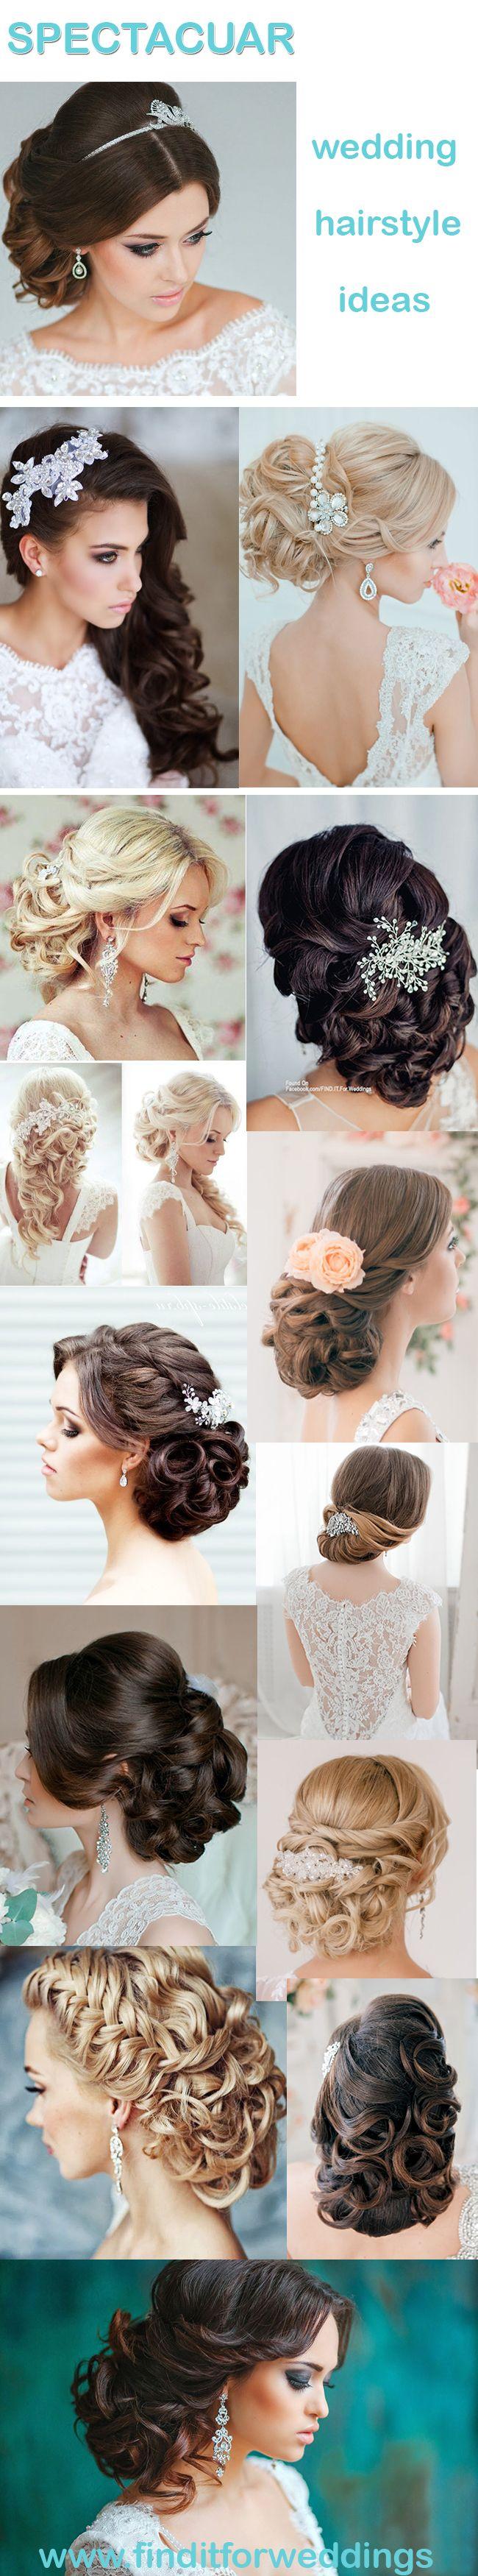 Wedding - Our Most Popular Wedding Hairstyles